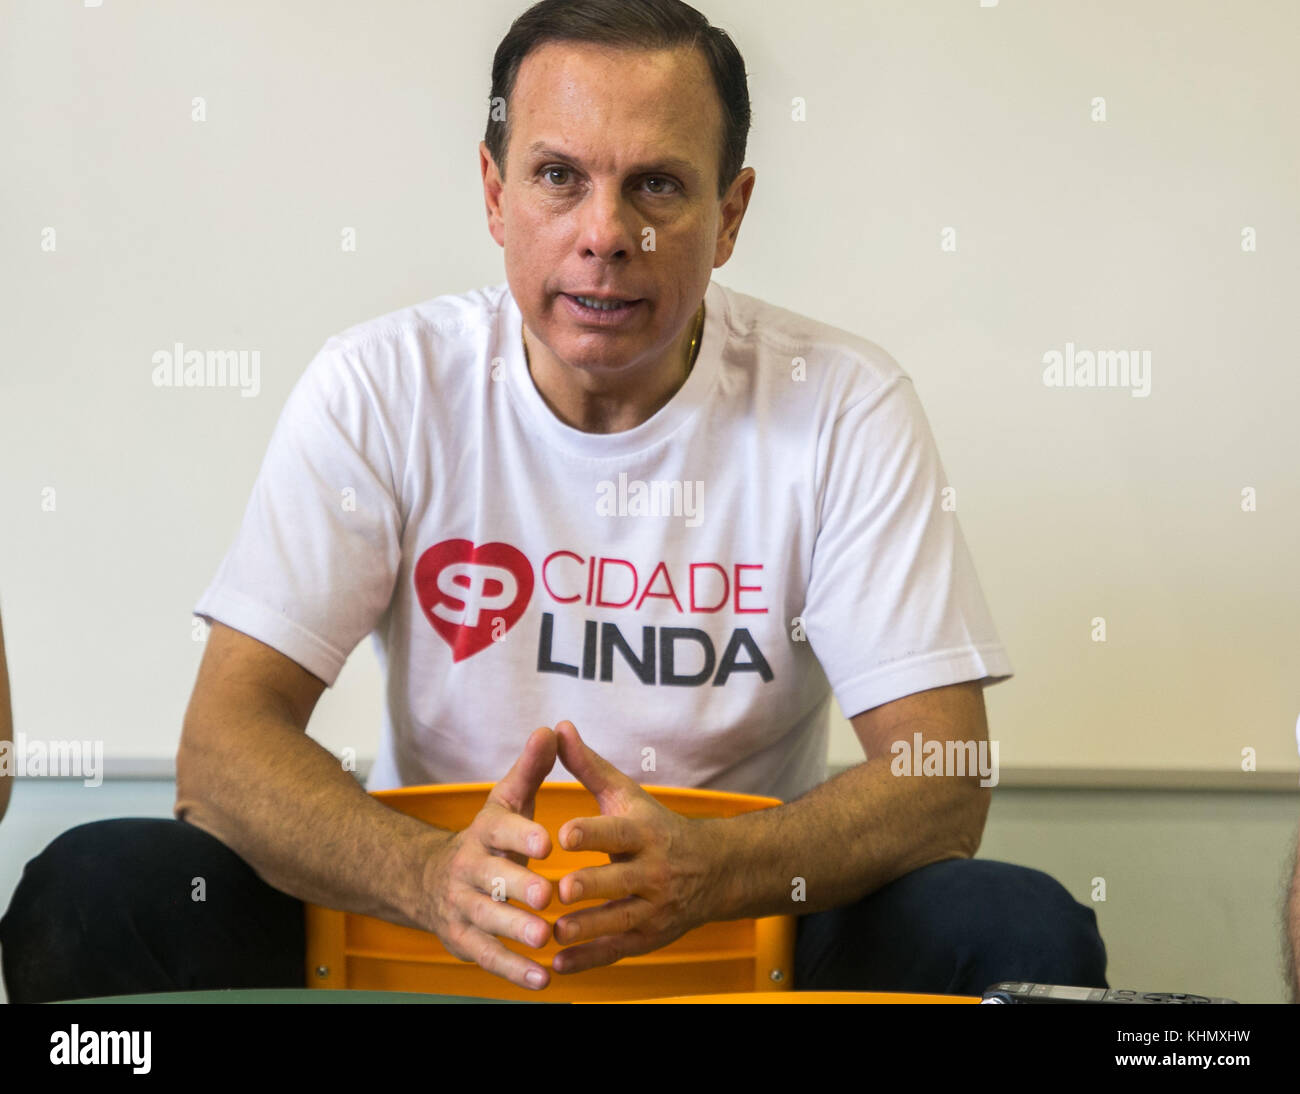 SÃO PAULO, SP - 18.11.2017: DORIA INAUGURA CEI EM GUARAPIRANGA SP - Mayor João Doria (PSDB) inaugurated a new Guarapiranga I Early Childhood Education Center (CEI) in the Guarapiranga region, south of the city of São Paulo, this Saturday (18). The new CEI has 9 classrooms and a park, as well as a toy library, equipped kitchen and dining room, where 5 daily meals will be served coffee and morning snack, lunch, afternoon coffee and dinner. The total investment was 9.5 million, the unit has 1010.55 square meters being 490.20 meters built. (Photo: Tom Vieira Freitas/Fotoarena) Stock Photo